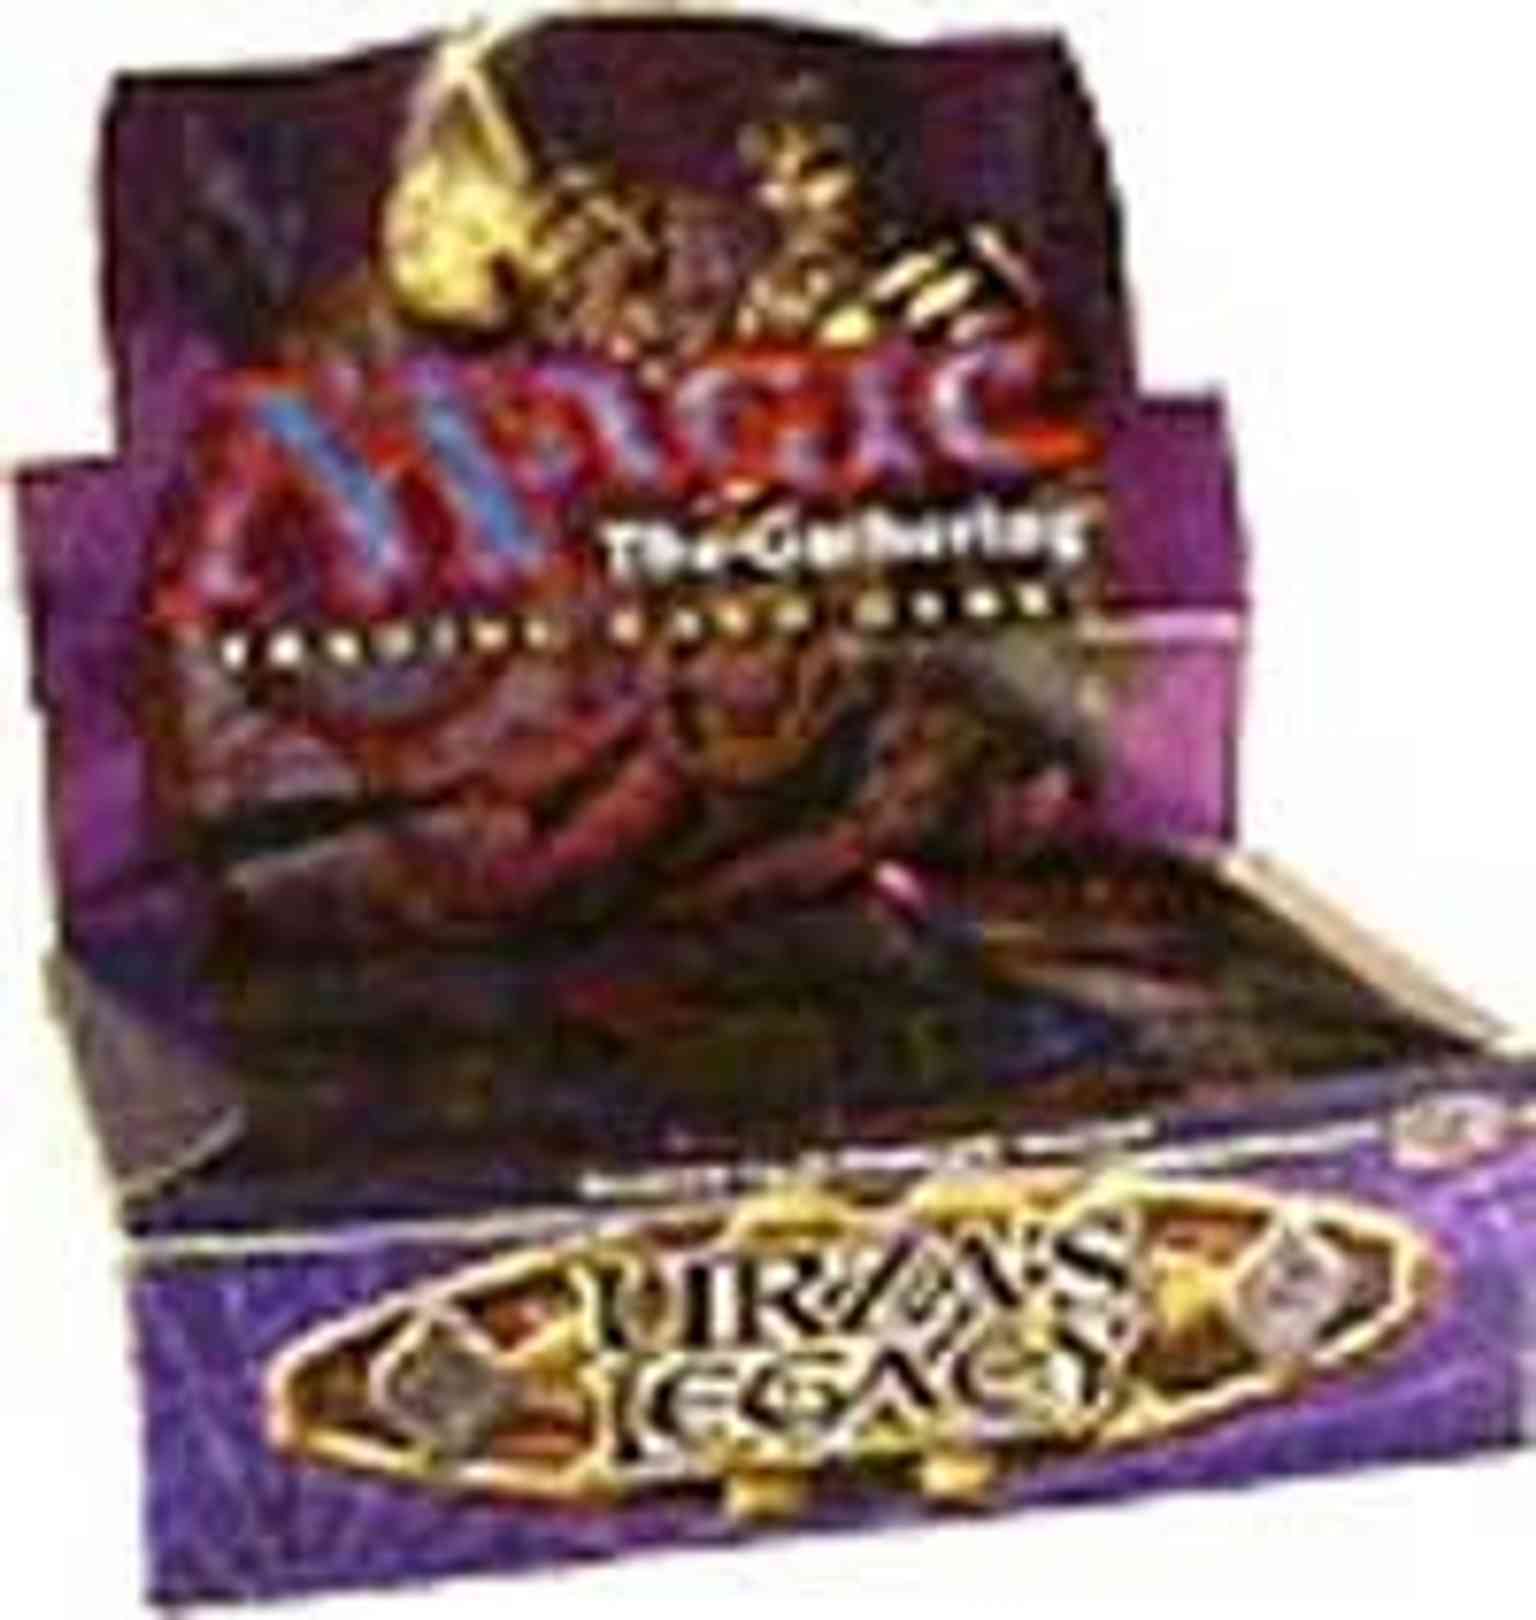 Urza's Legacy - Booster Box magic card front